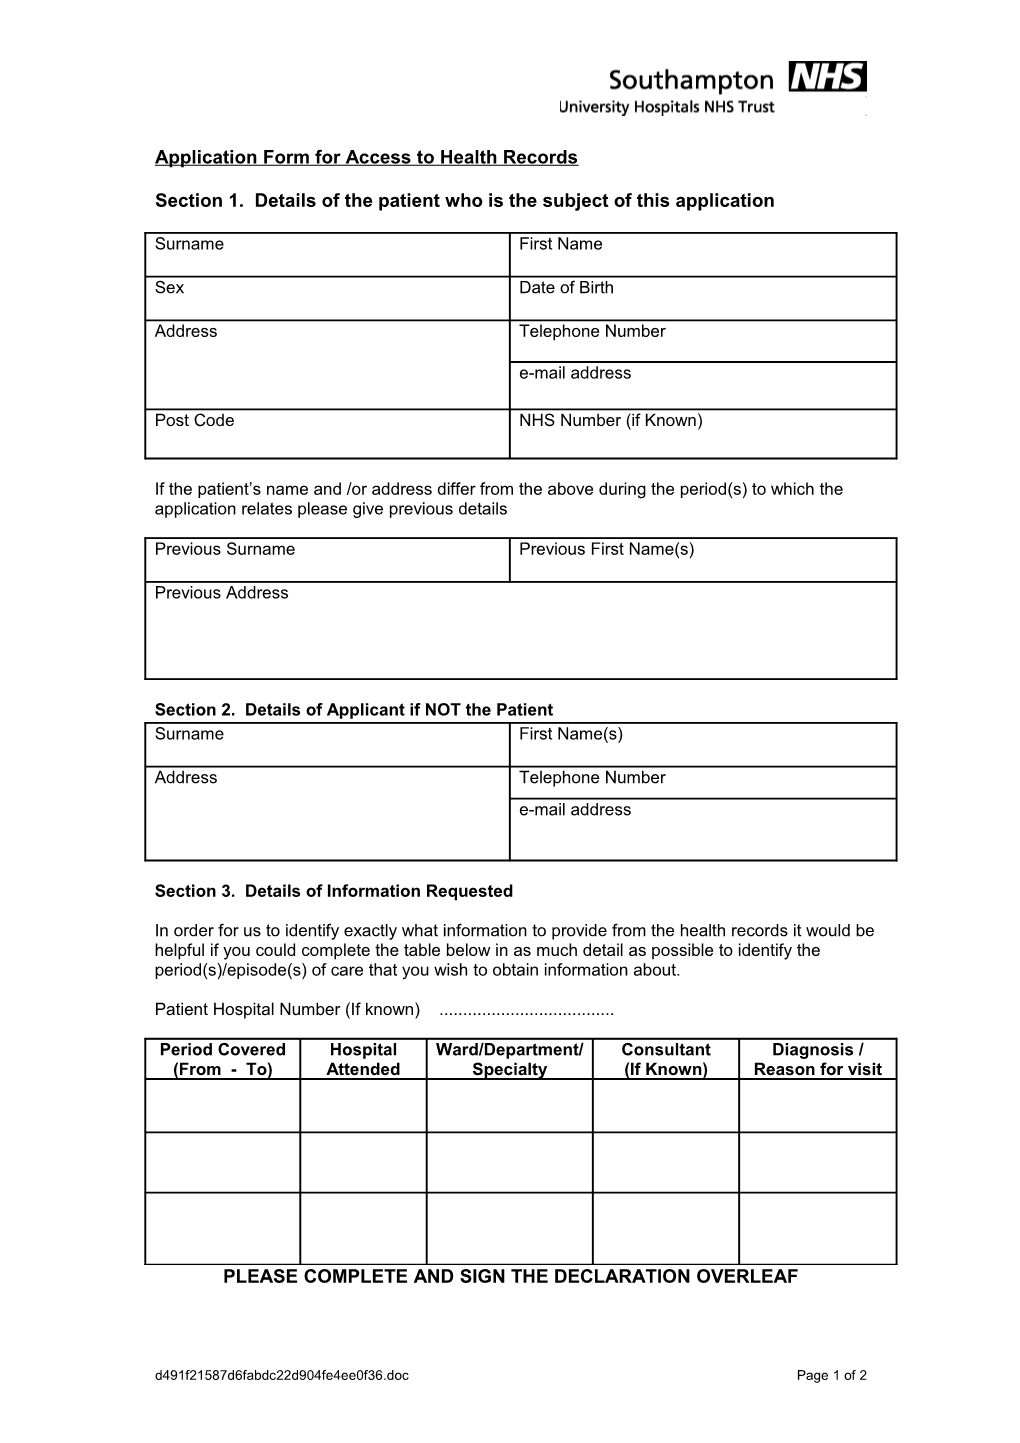 Application Form for Access to Health Records